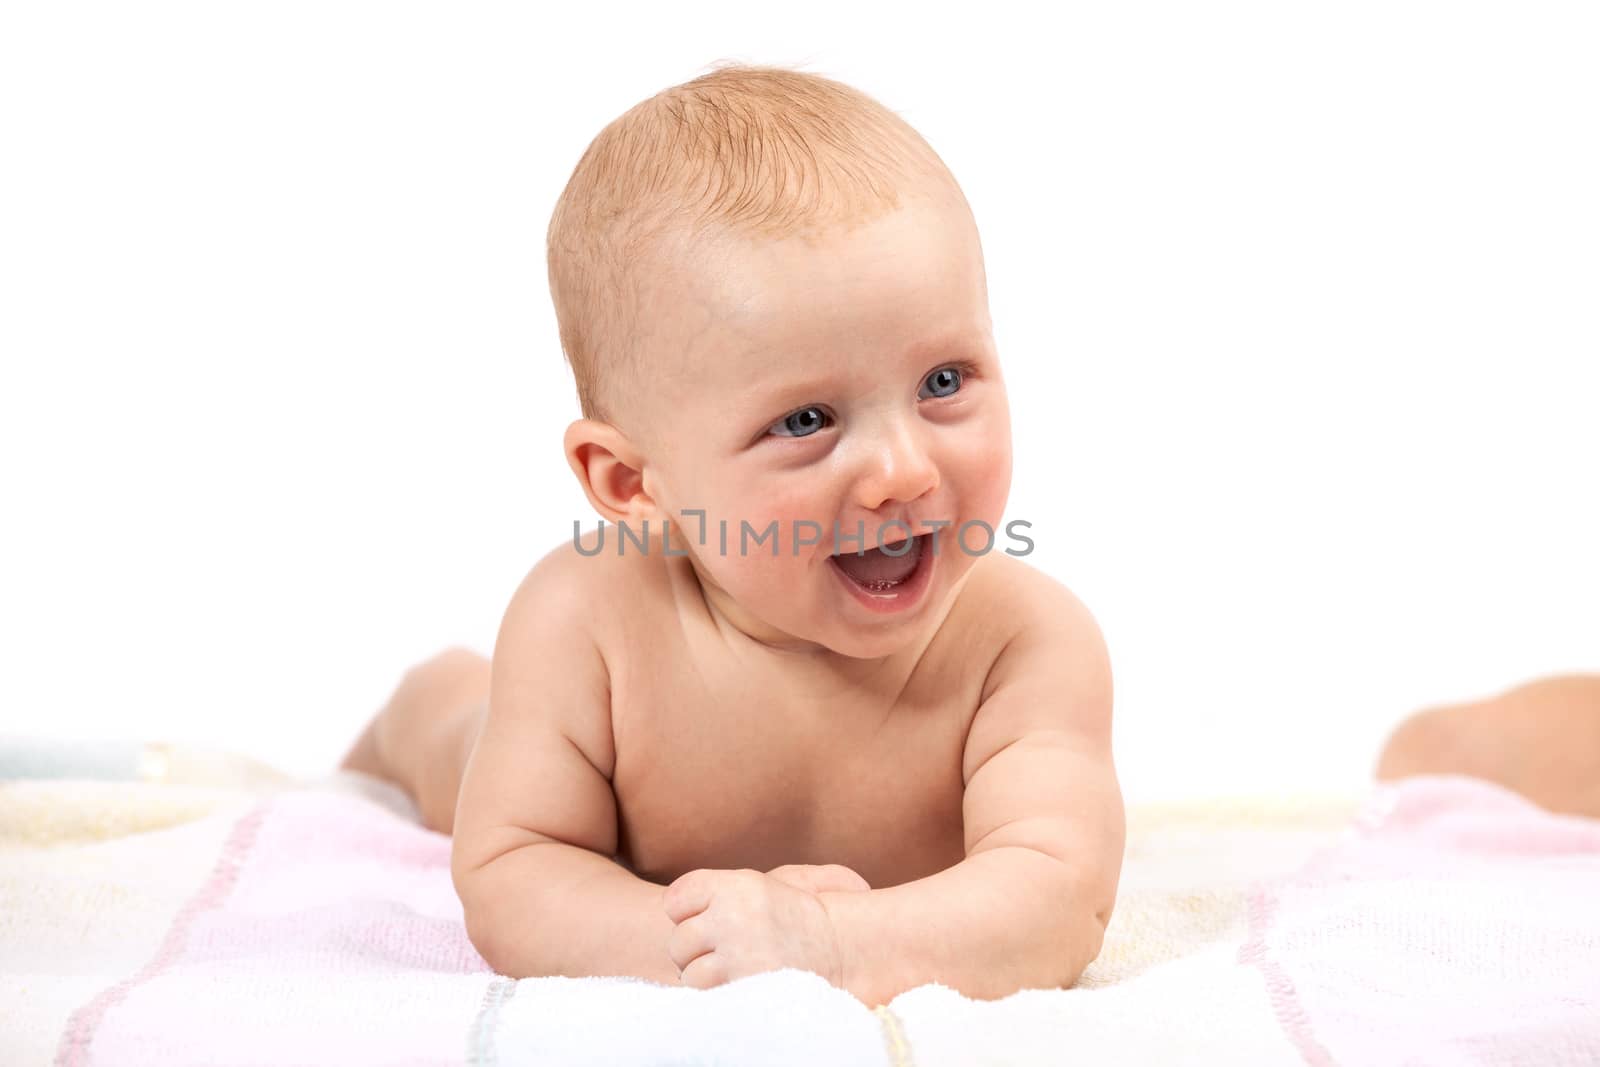 Cute smiling baby boy over white background